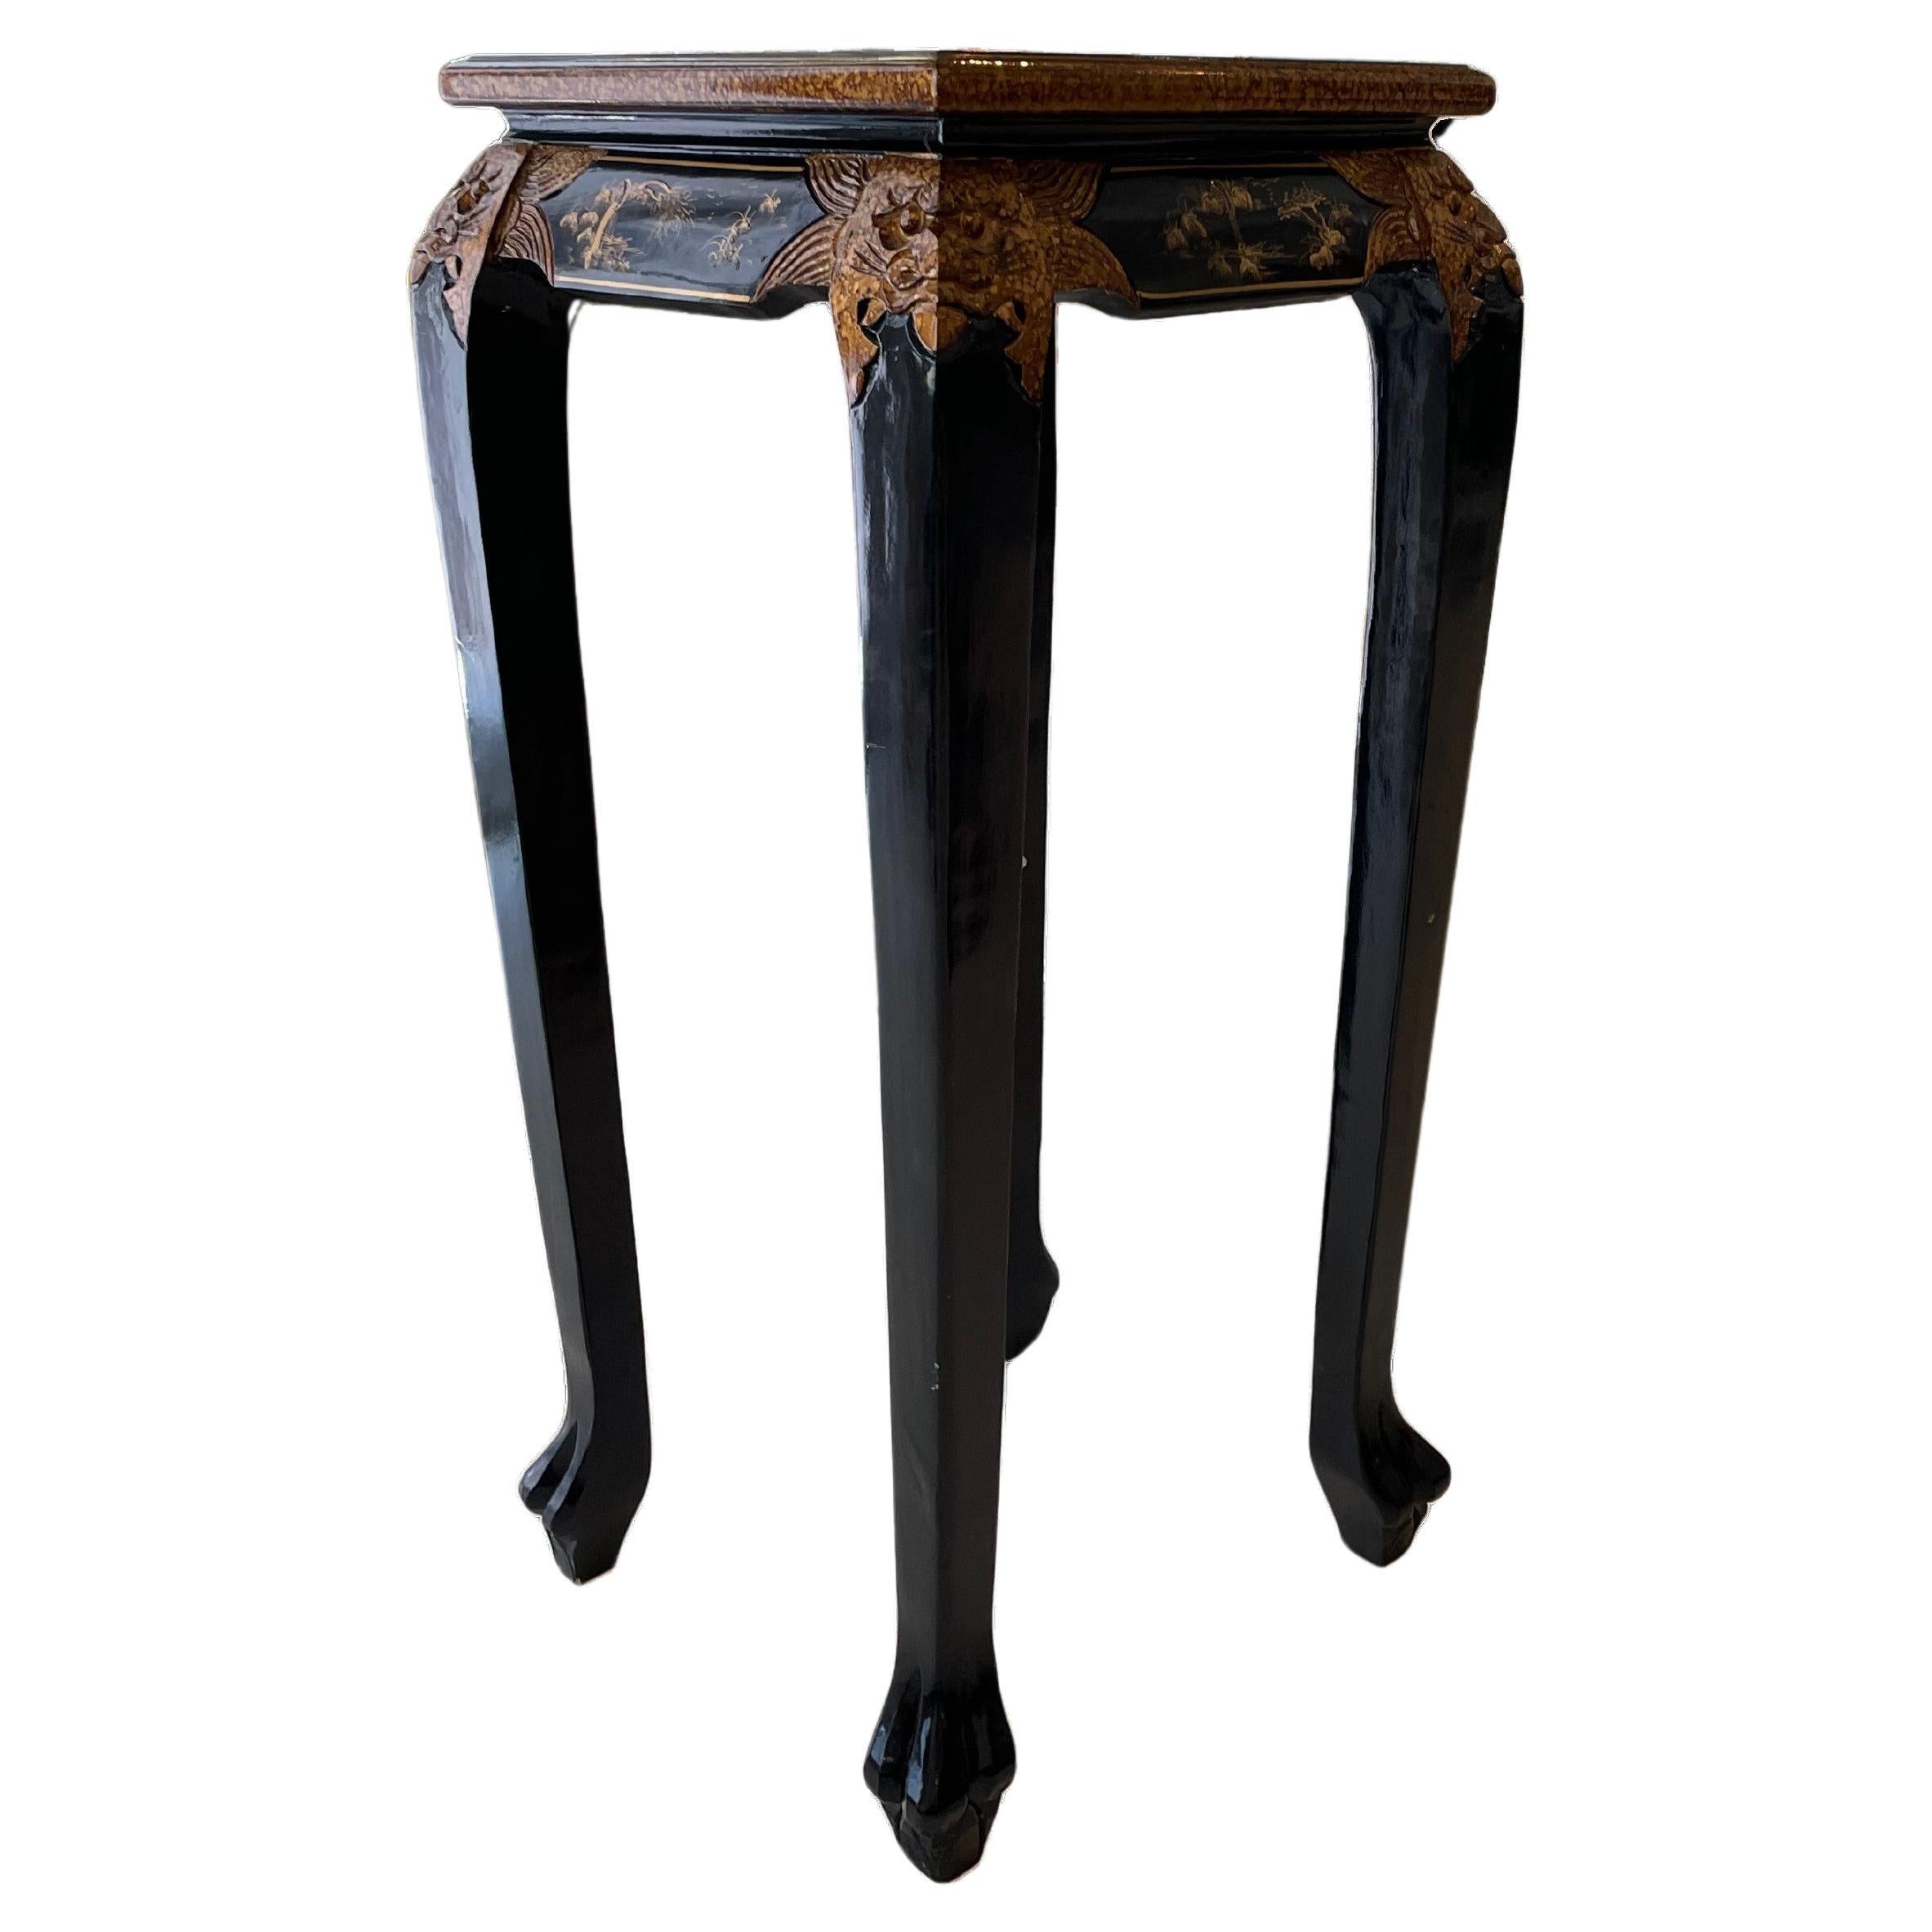 Chinoiserie Black Lacqured Pedestal Table with Gold Trim